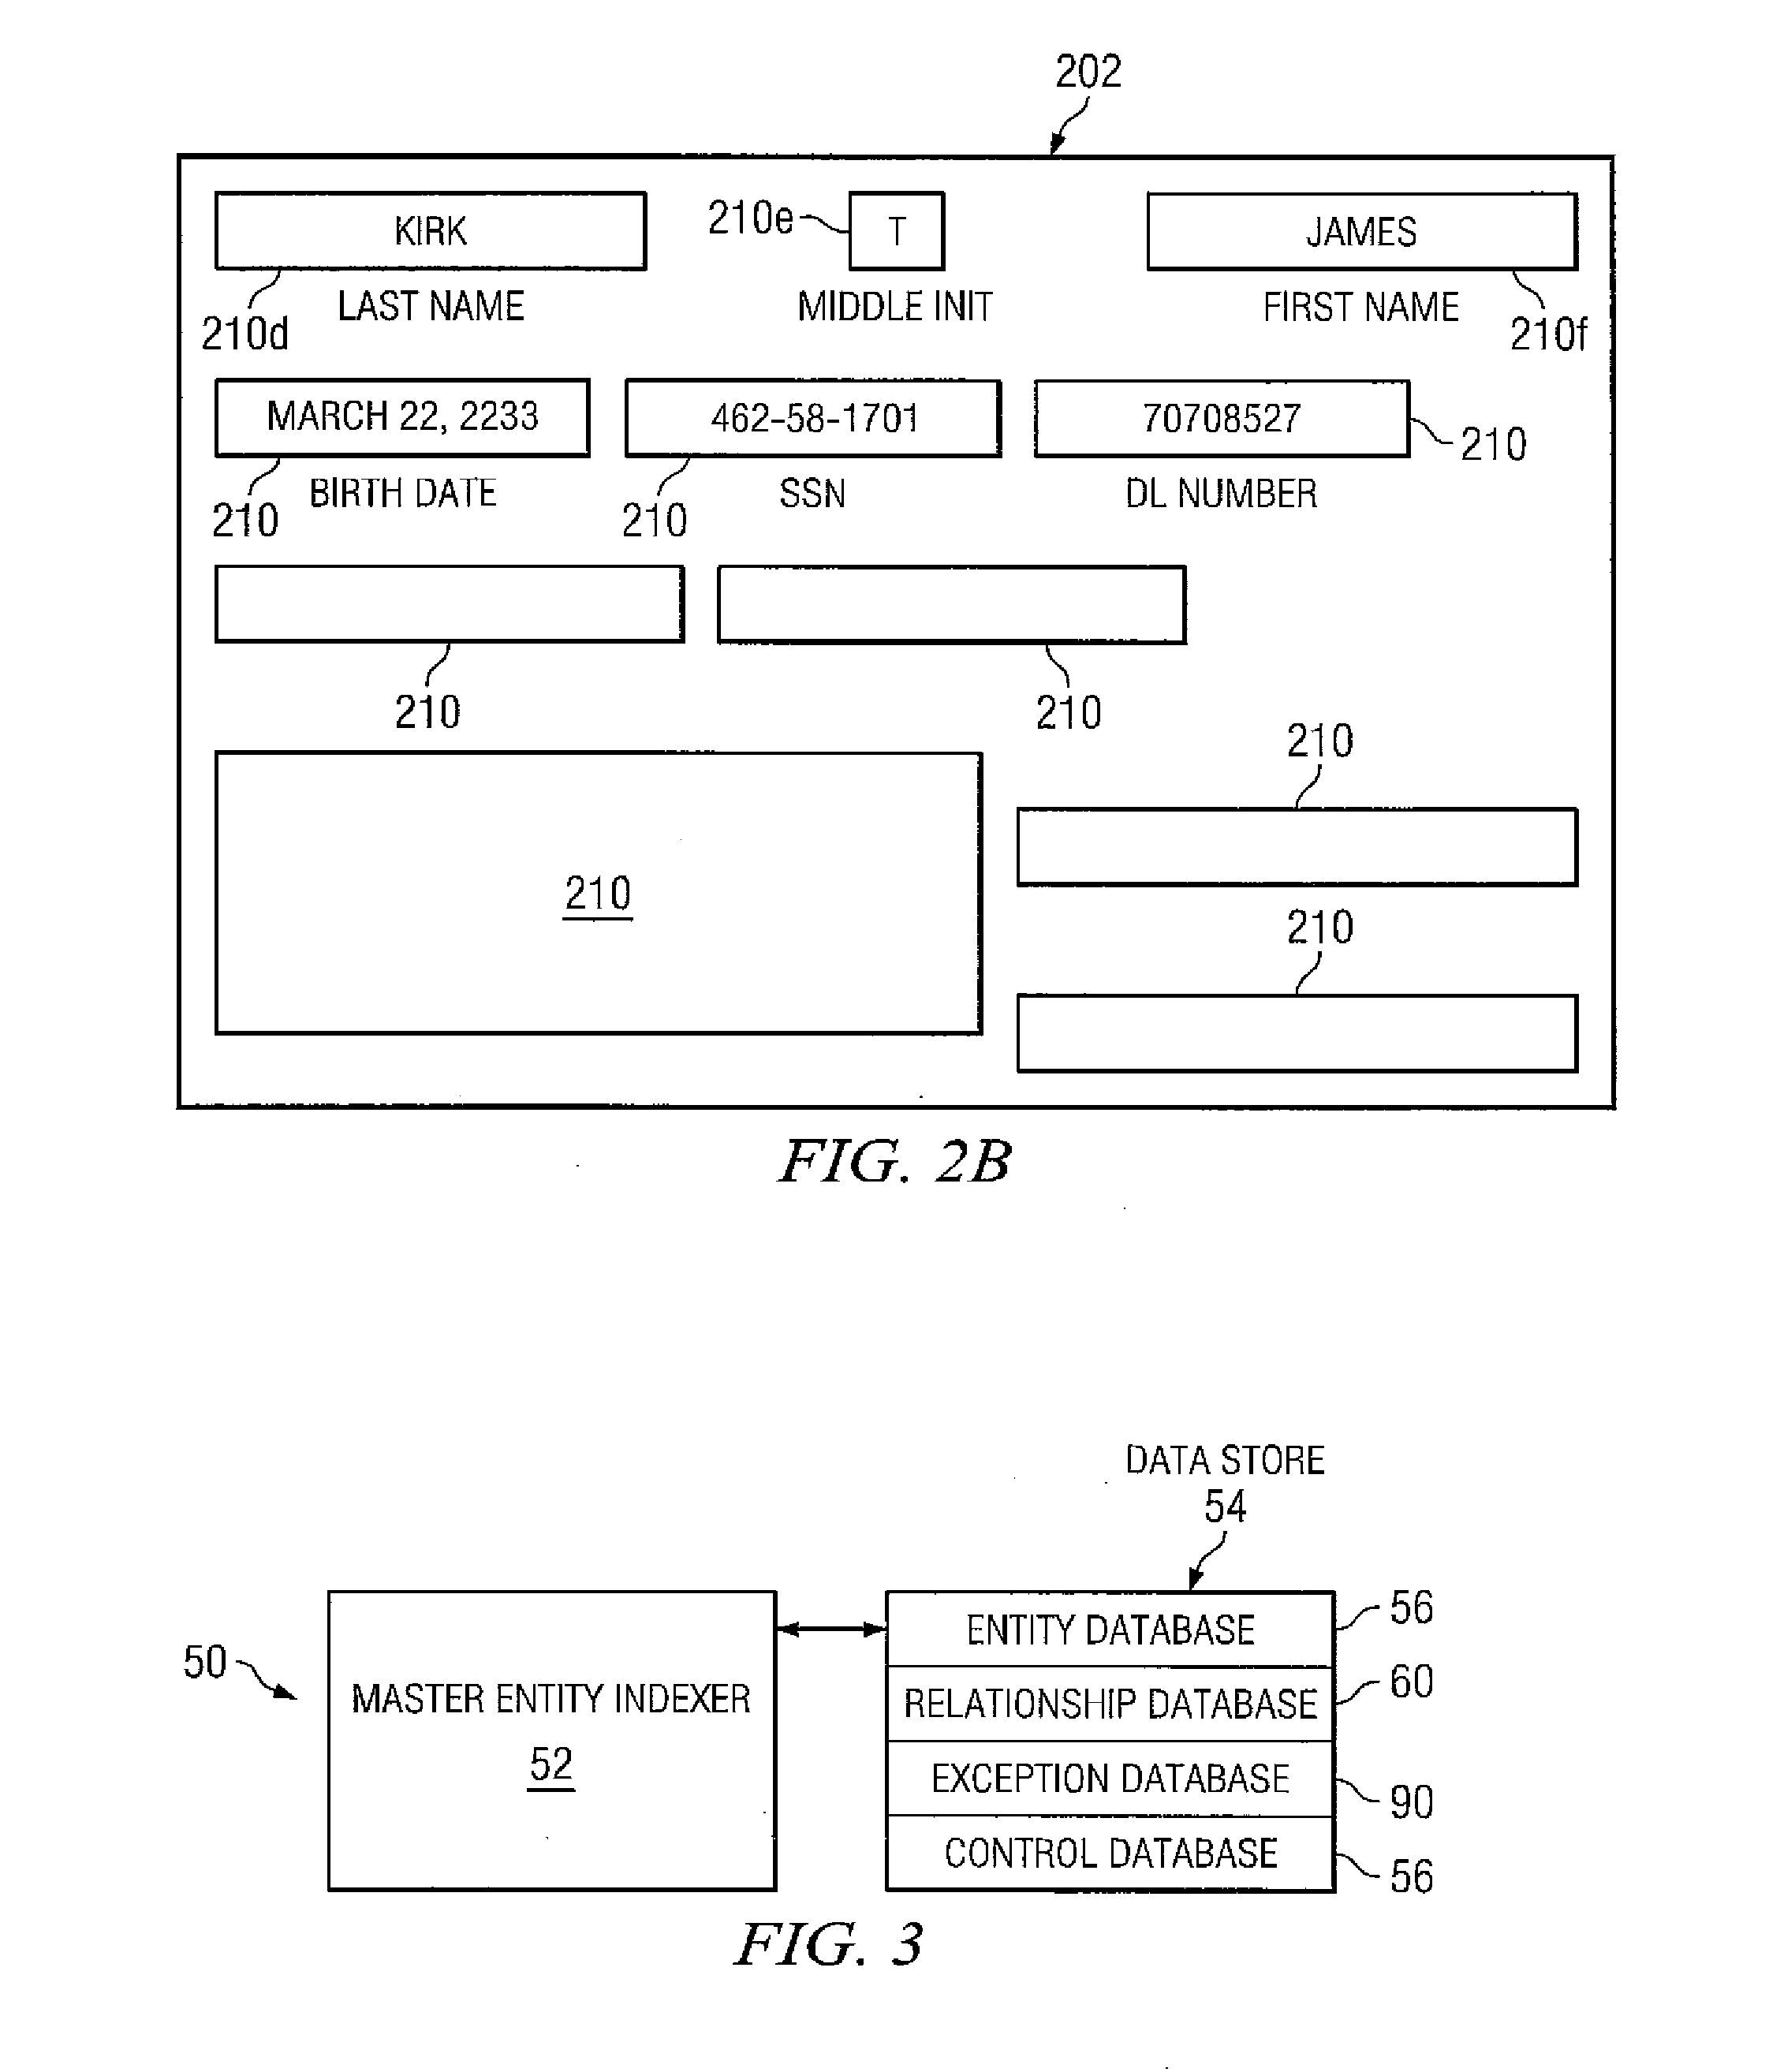 Method and system for indexing, relating and managing information about entities